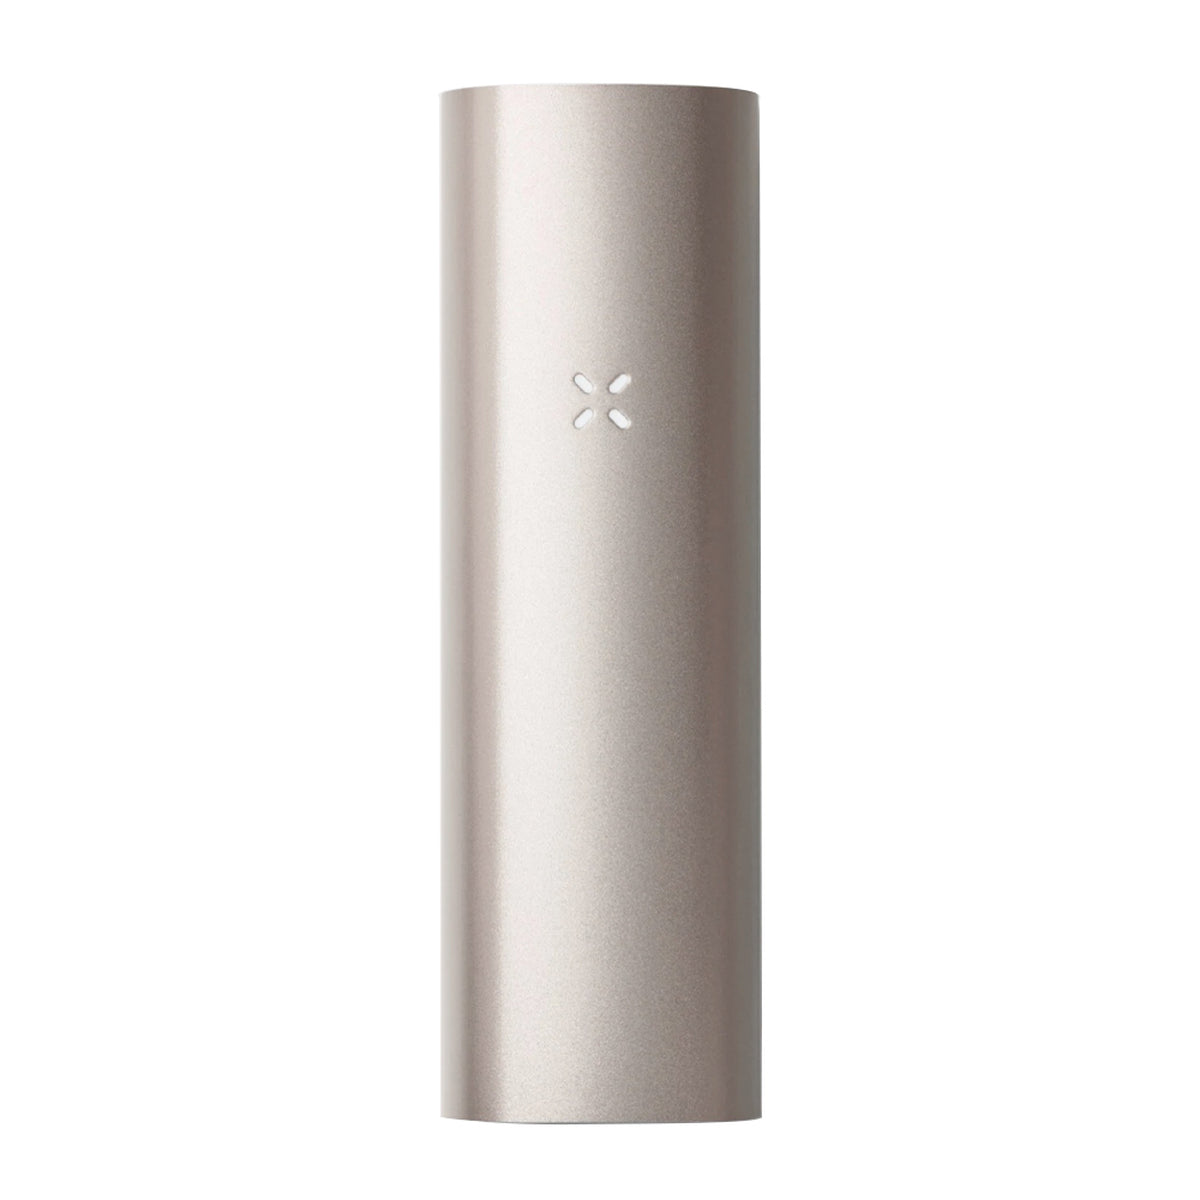 PAX 3 Deluxe Vaporizer by PAX PAX